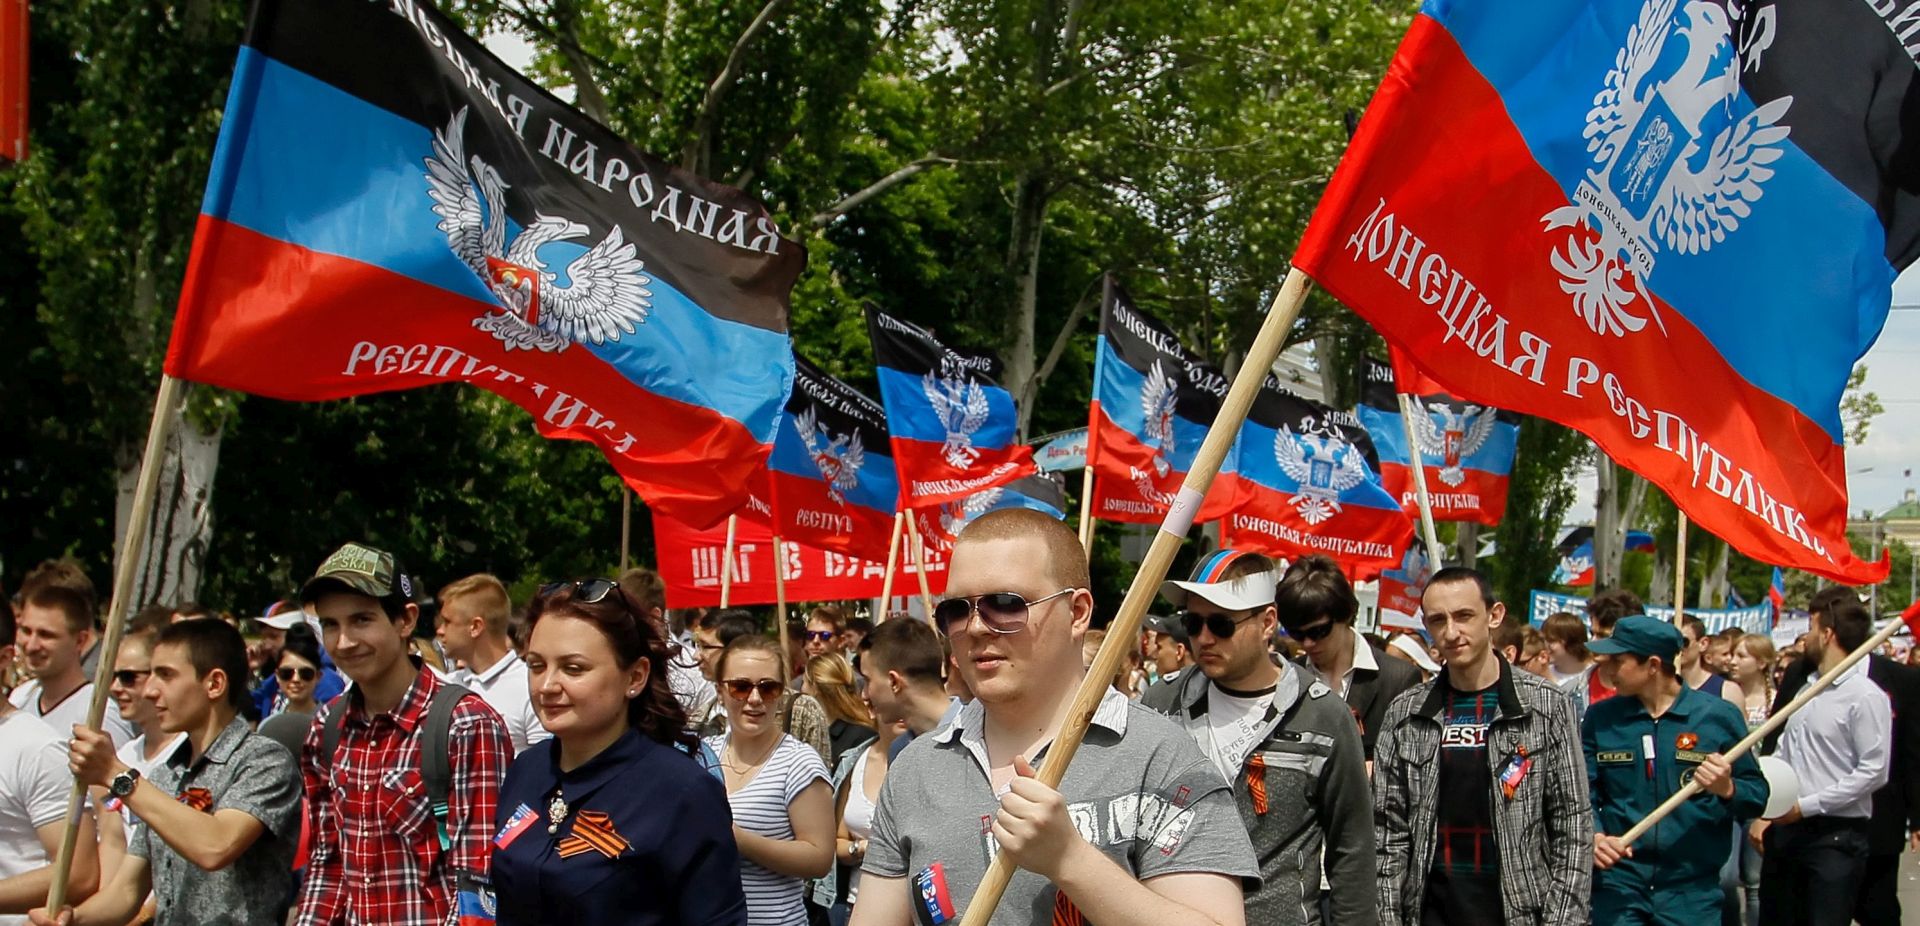 epa05299633 Citizens carry flags during a march marking the second anniversary of the independence referendum in downtown Donetsk, Ukraine, 11 May 2016. A disputed secession referendum was held on 11 May 2014 in eastern Ukraine, which led to the creation of the self-proclaimed Donetsk People's Republic (DNR or DPR).  EPA/ALEXANDER ERMOCHENKO